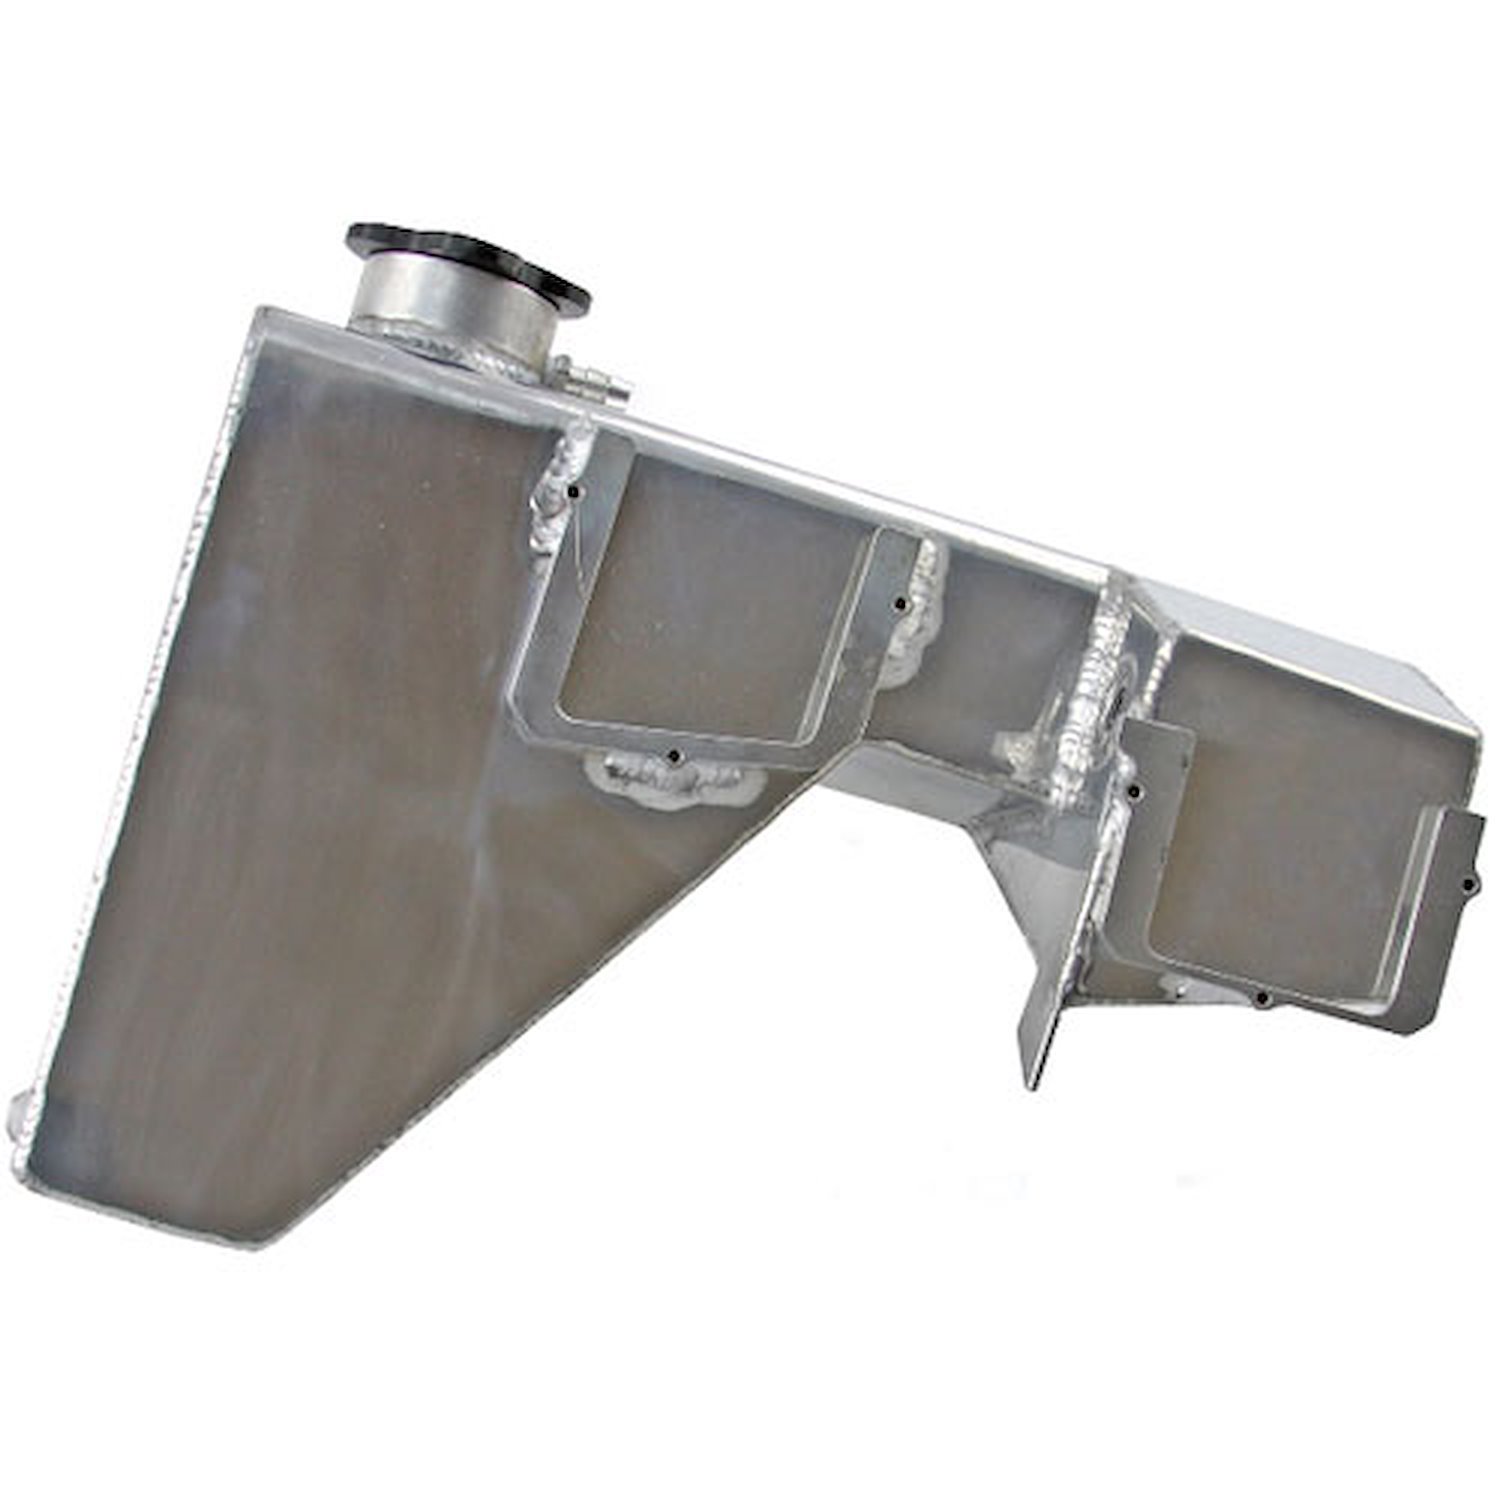 Dodge 2005-12 2.7L to 6.1L Fabricated Aluminum Coolant Expansion Tank Polished